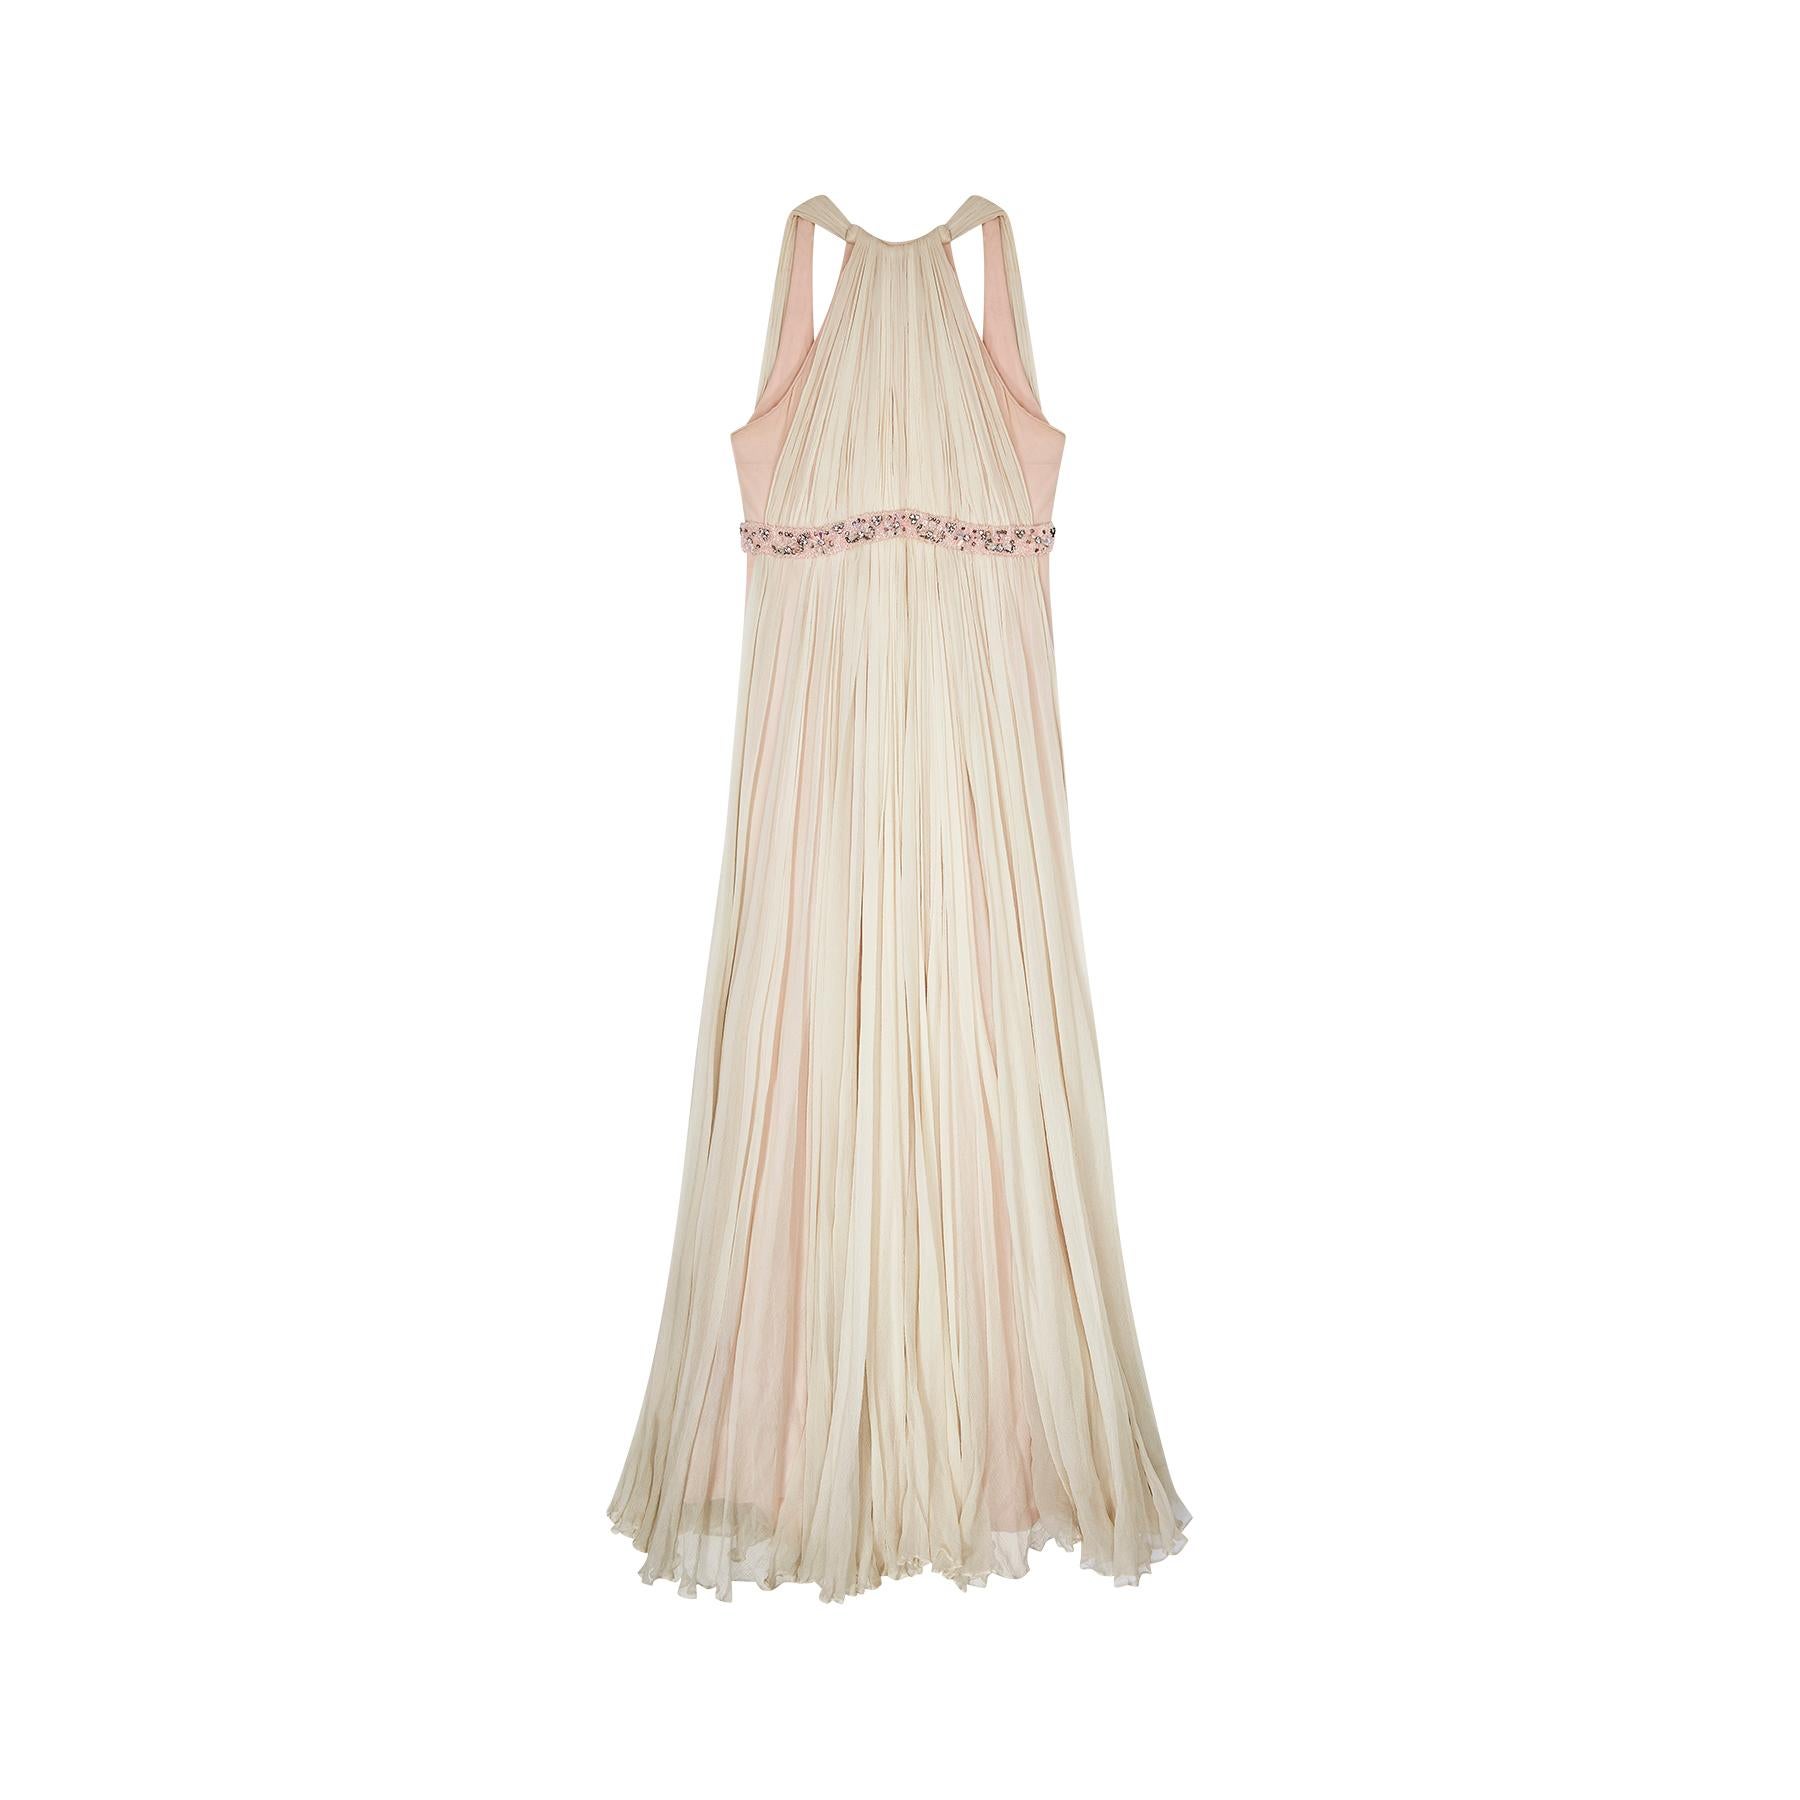 A stunning 1960s couture made pleated silk chiffon ballerina style cocktail dress by Sarmi of New York. This utterly magical dress is set off beautifully with an empire line bust in crystal, bugle beads and diamante beadwork. The pleating of the